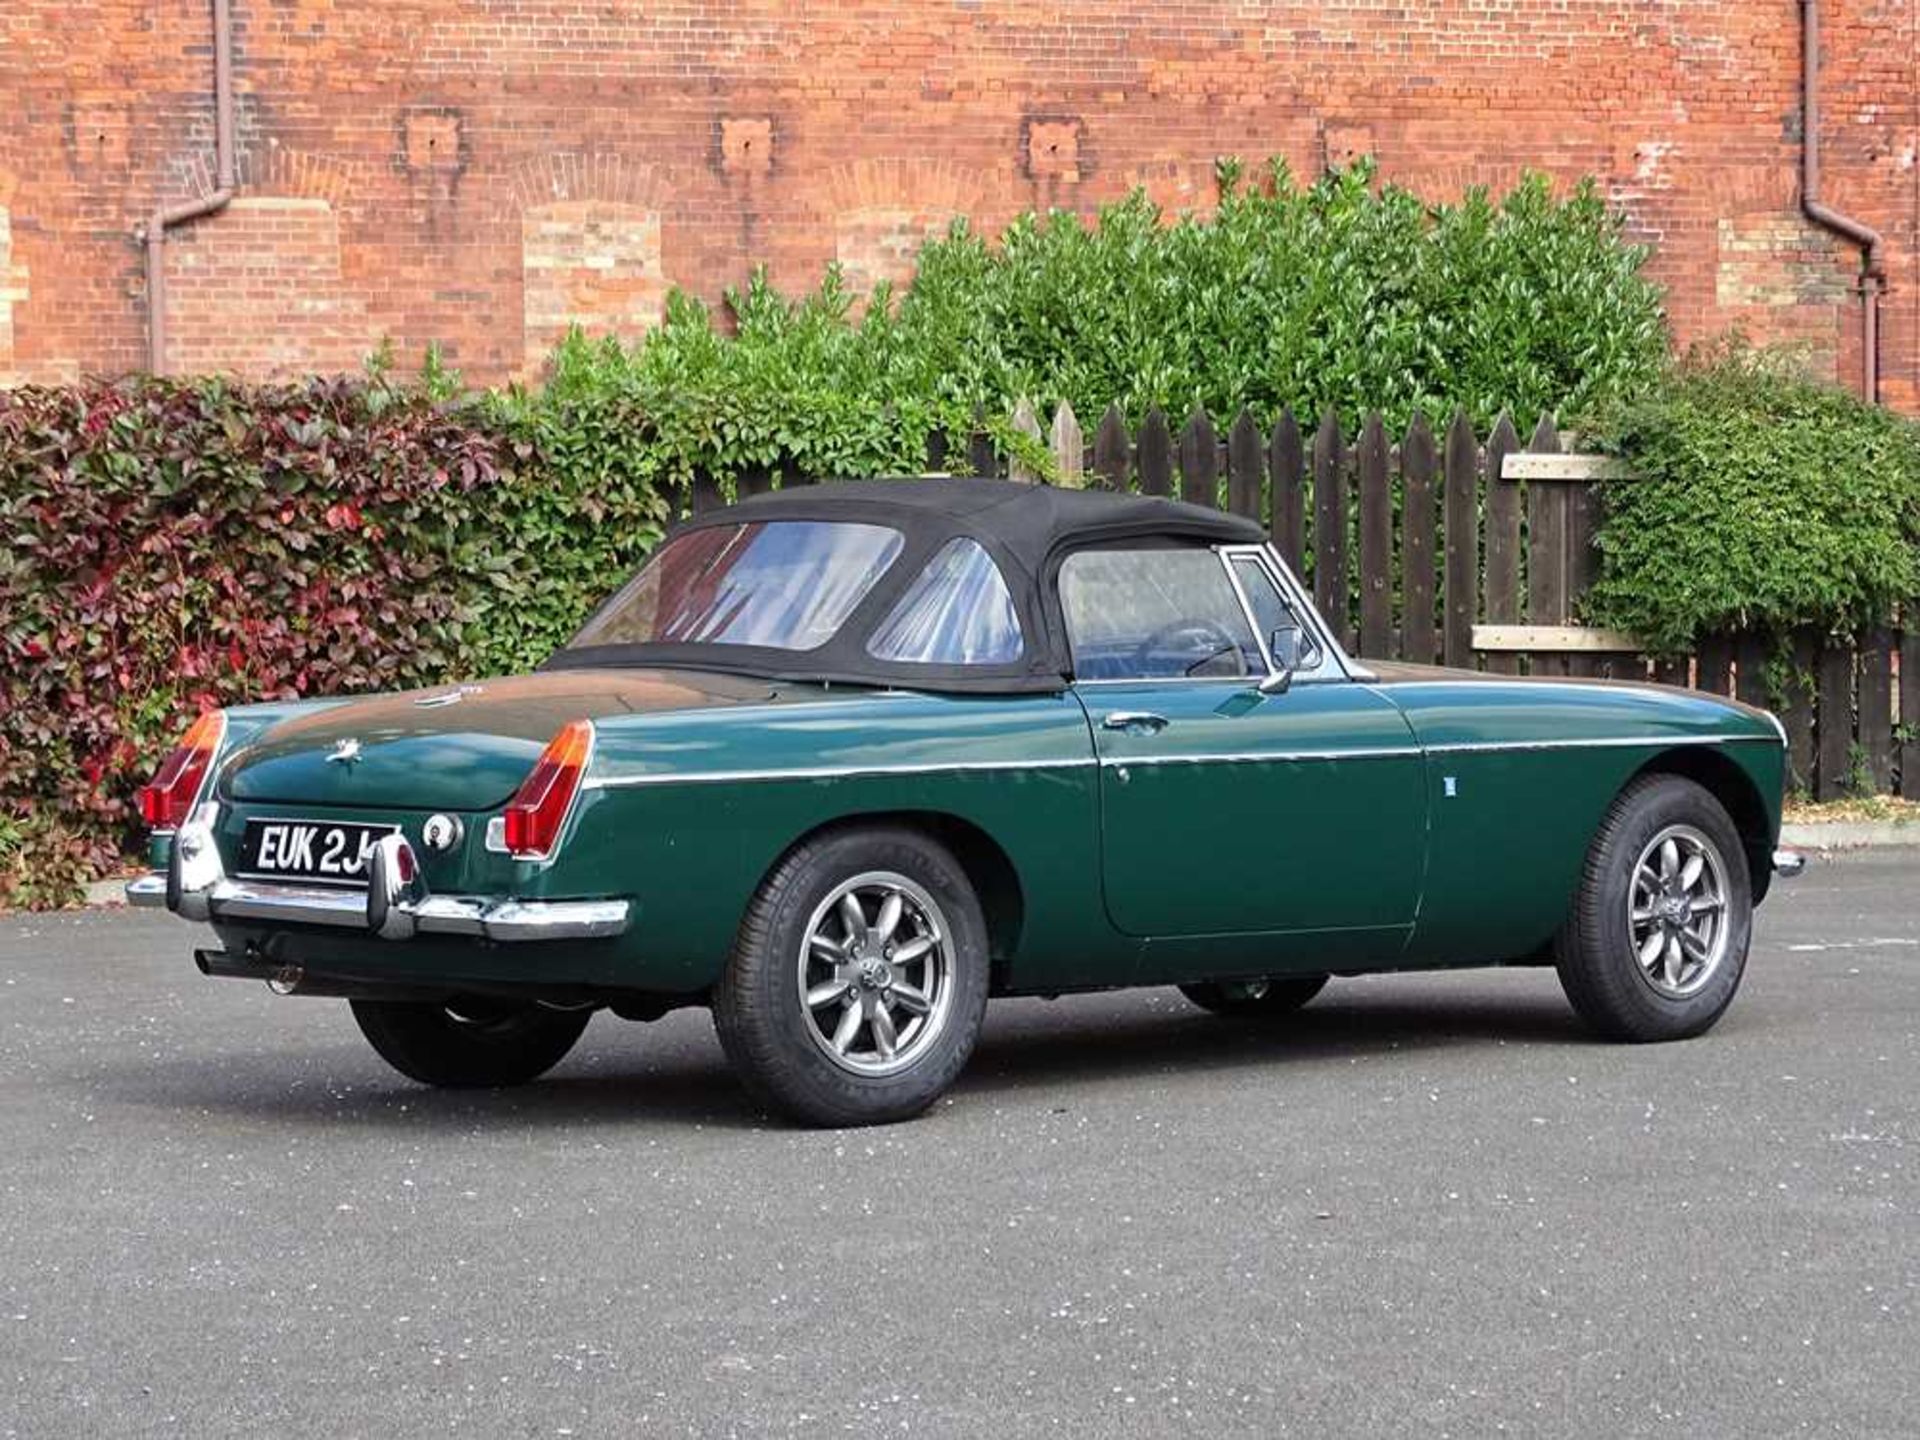 1971 MG B Roadster Restored at a cost of c.£33,000 - Image 5 of 43